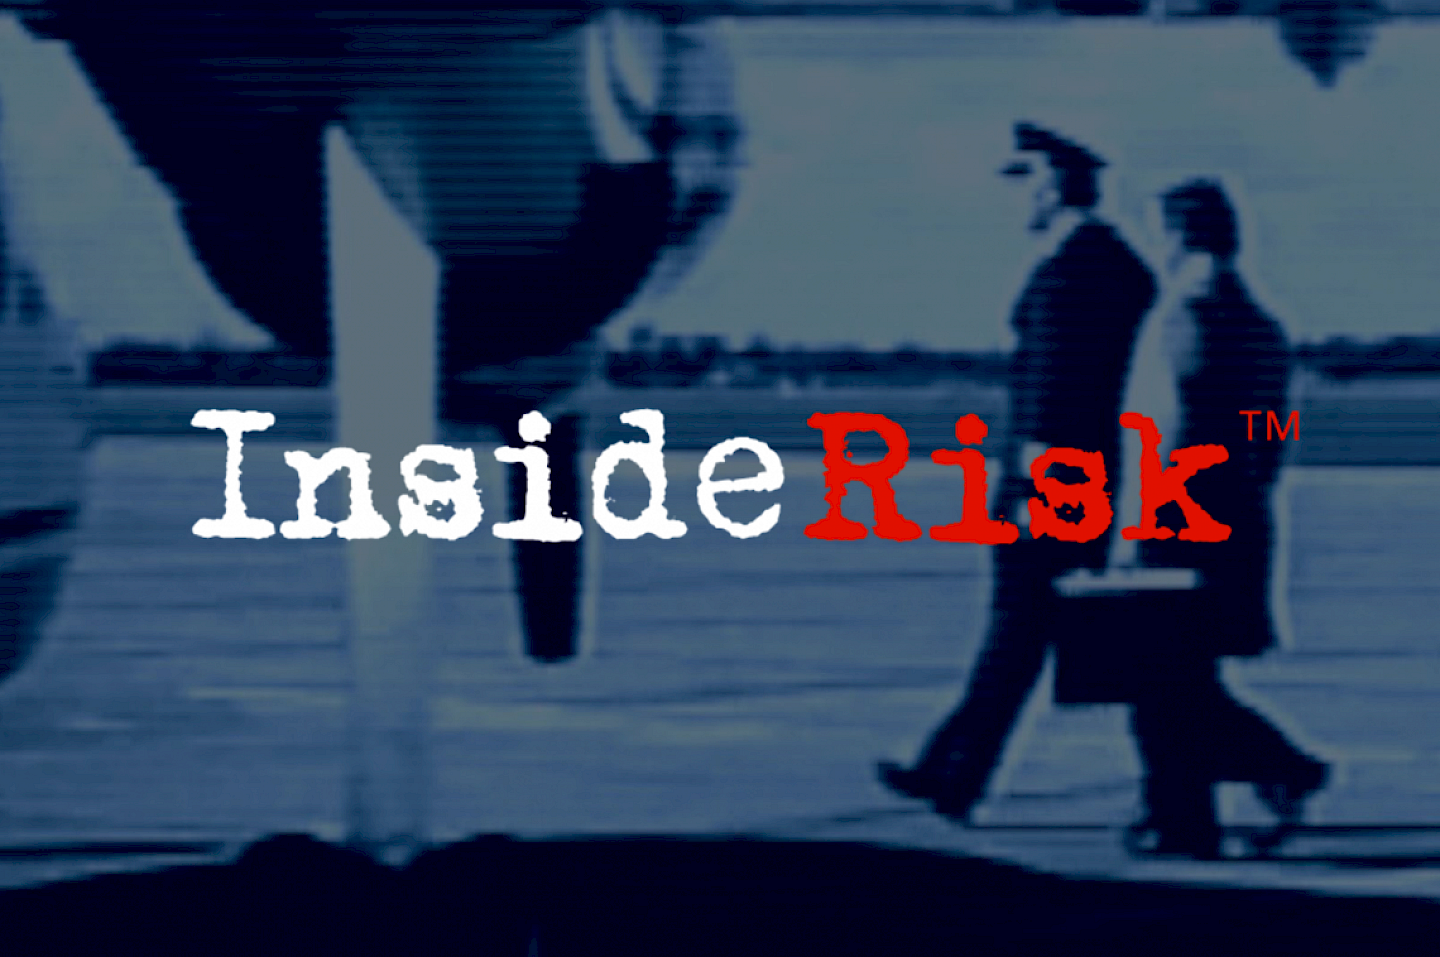 Inside Risk: What Kind of Leader Are You Under Maximum Pressure?